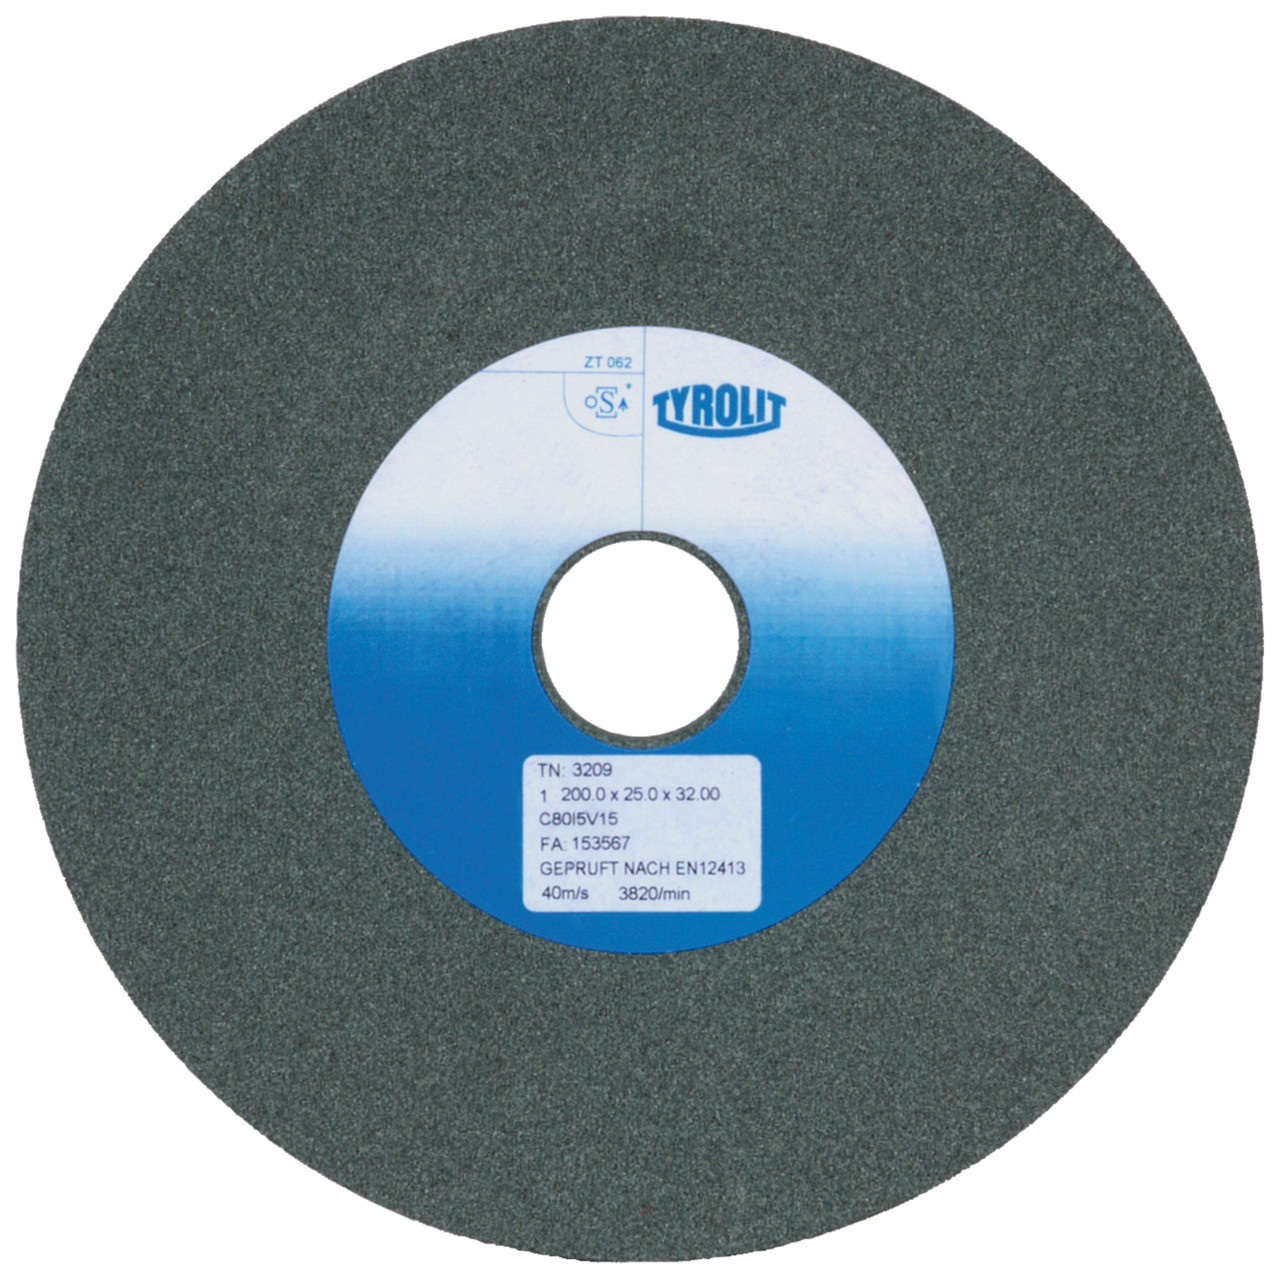 Tyrolit Conventional ceramic grinding discs DxDxH 200x25x32 For carbide and cast iron, shape: 1, Art. 3206